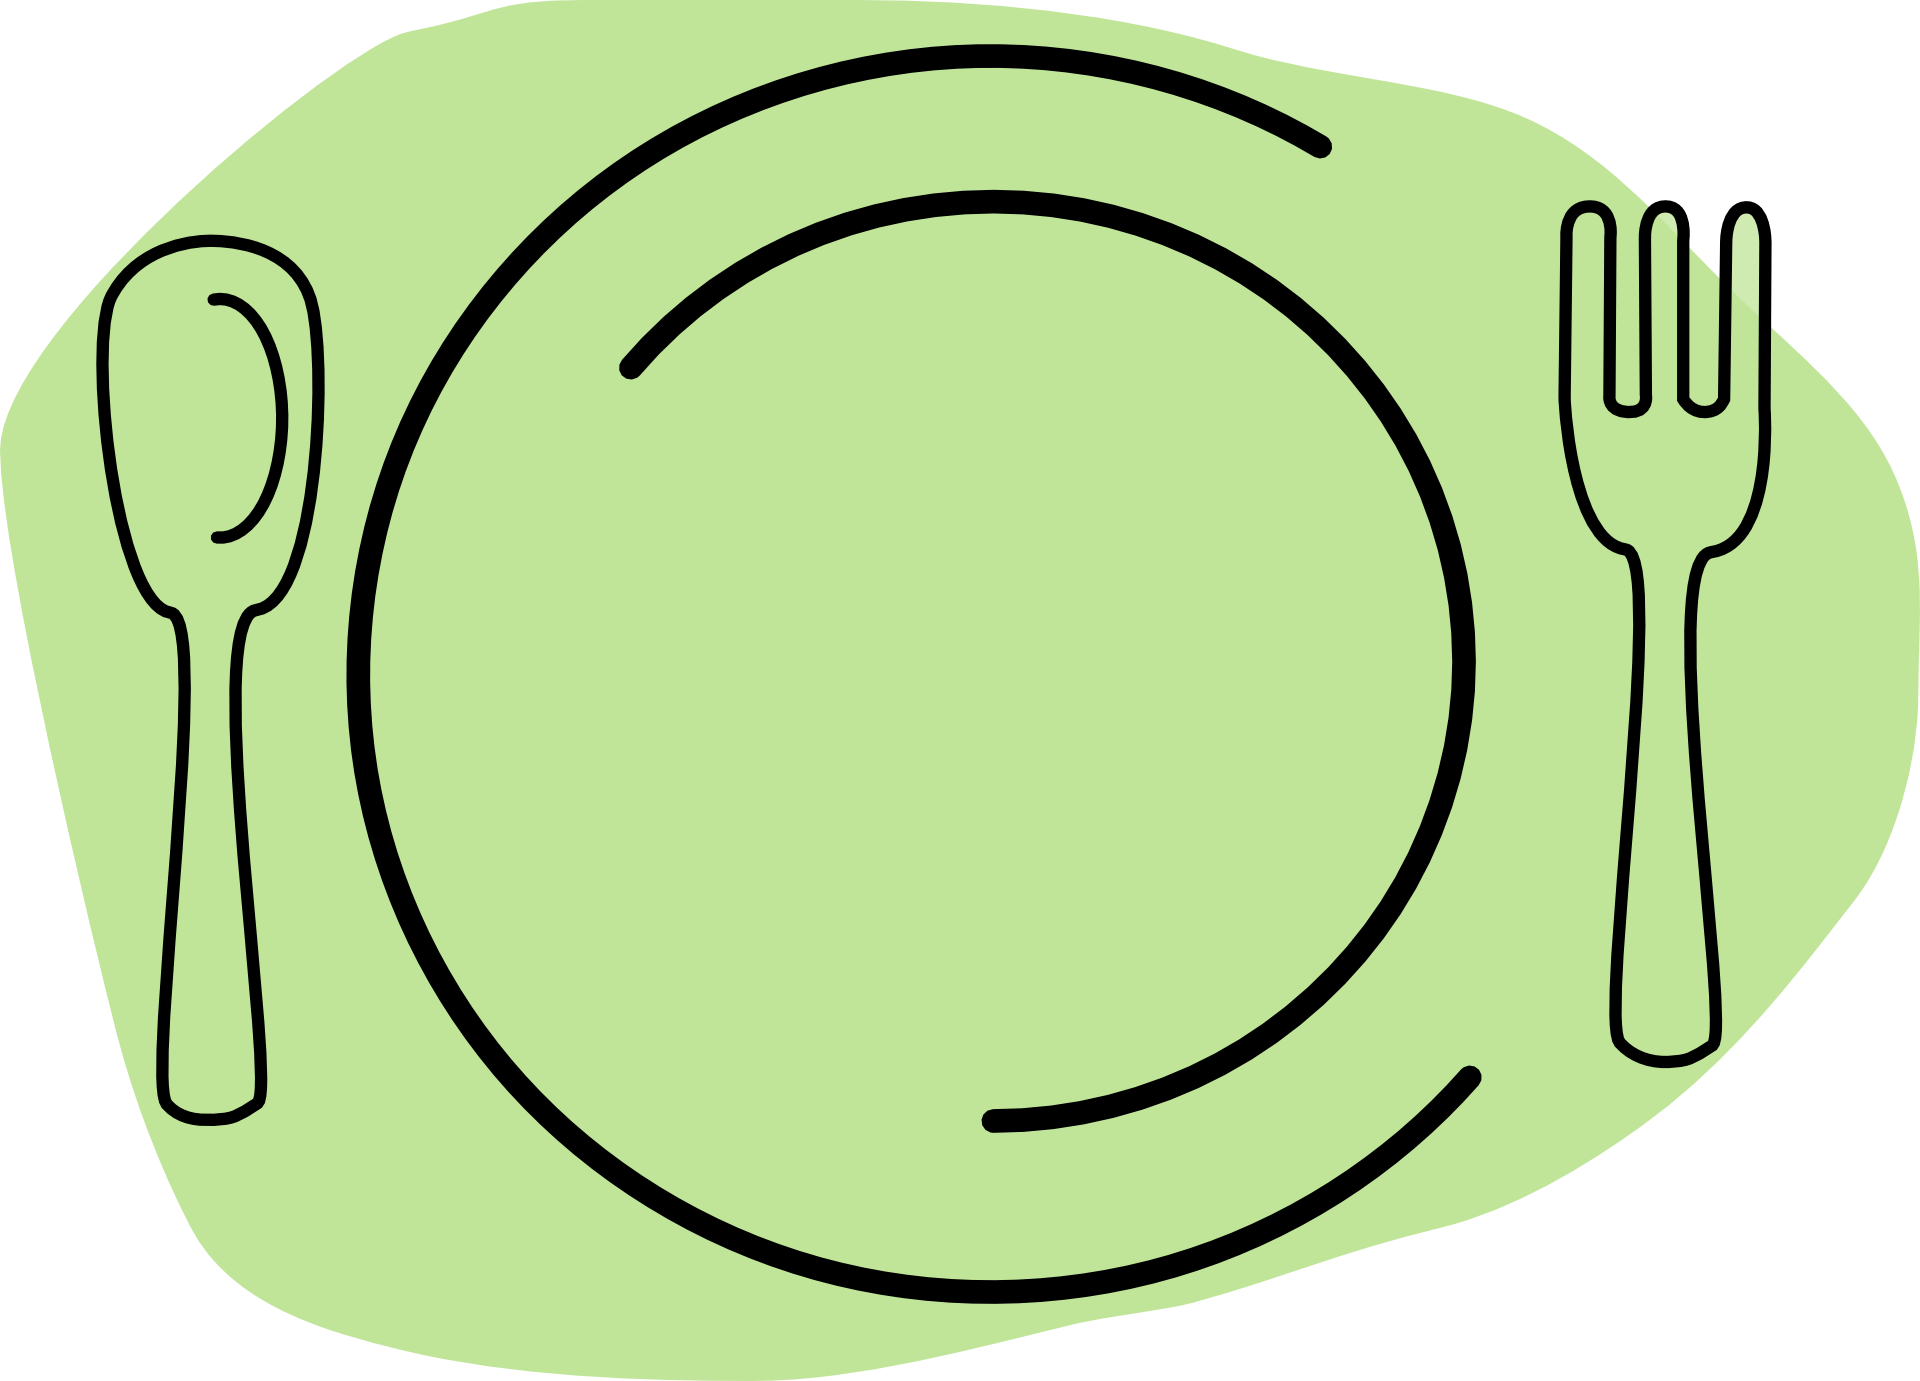 image of plate and silverware